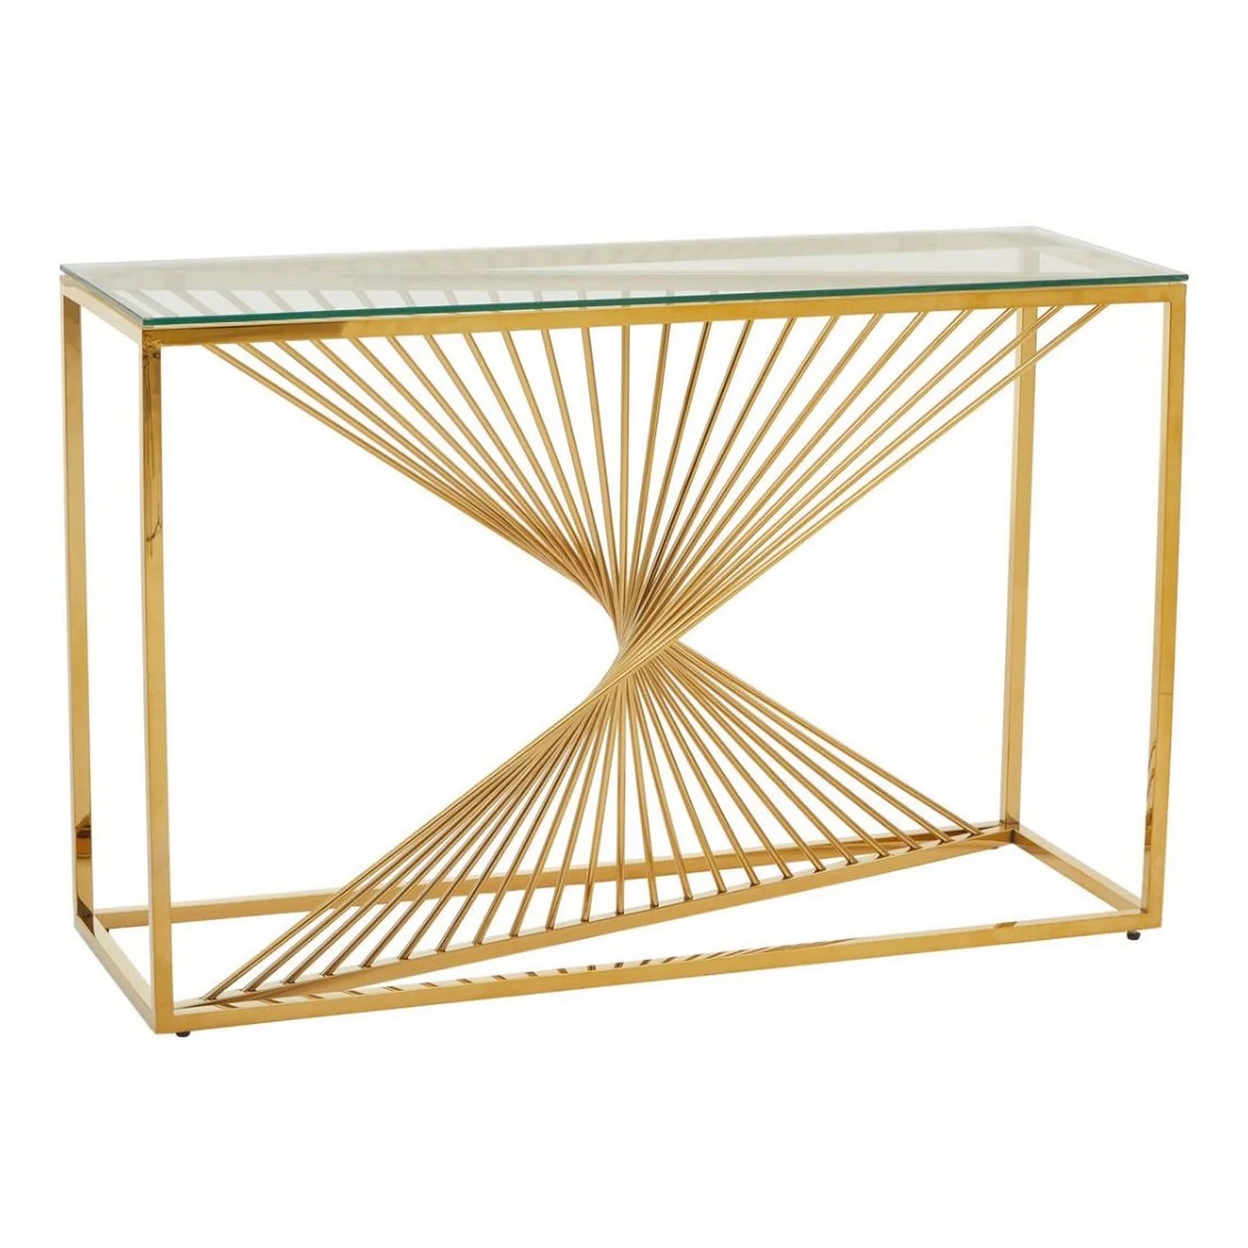 Glen 47 Inch Sofa Console Table, Tempered Glass Top, Twisted Slatted Design- Saltoro Sherpi